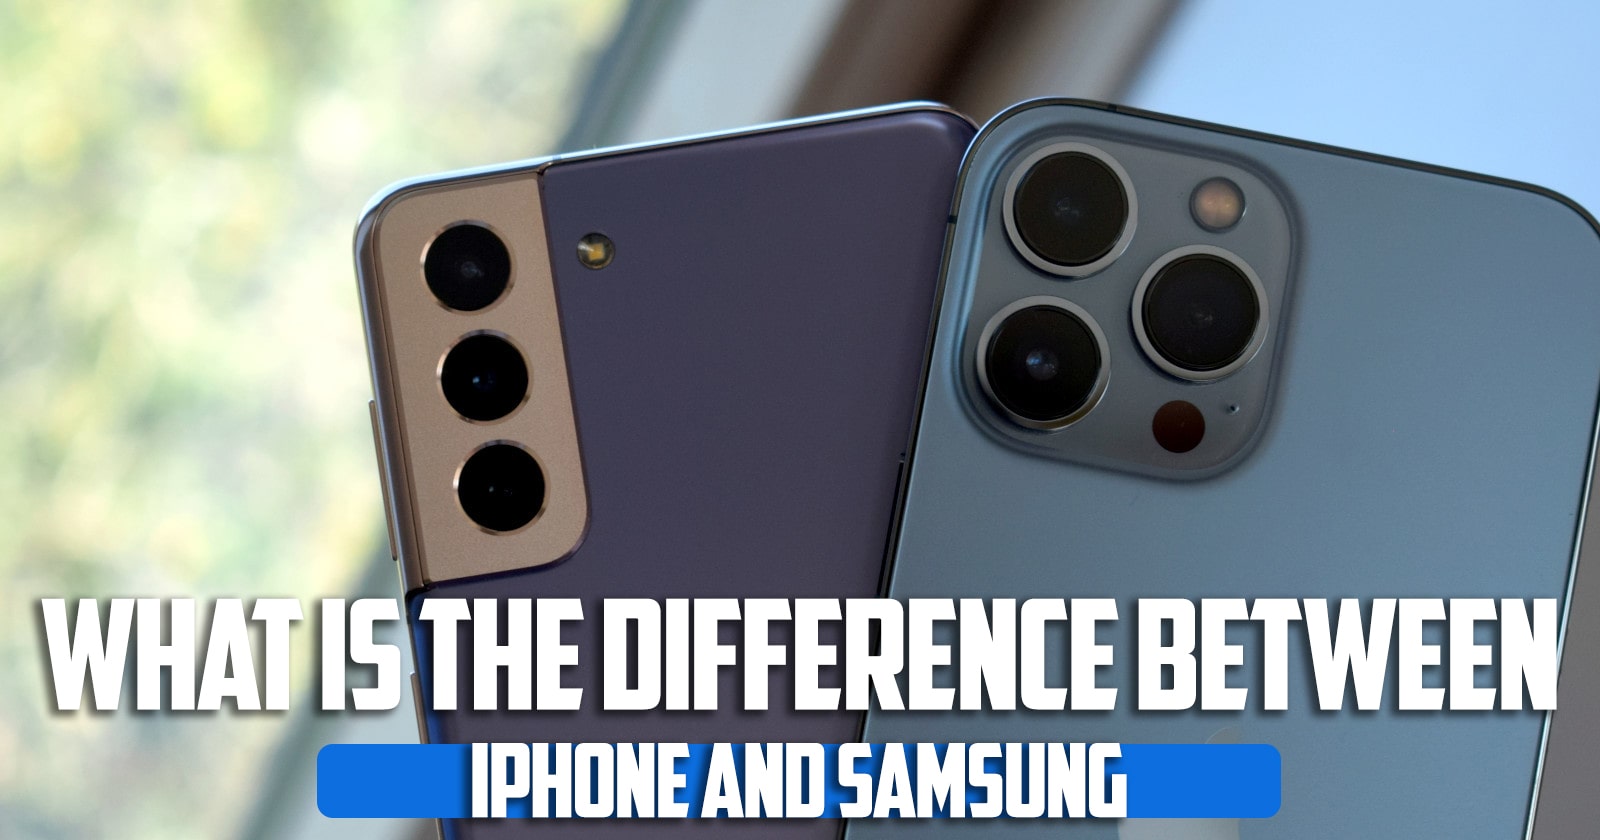 What is the difference between iPhone and Samsung?